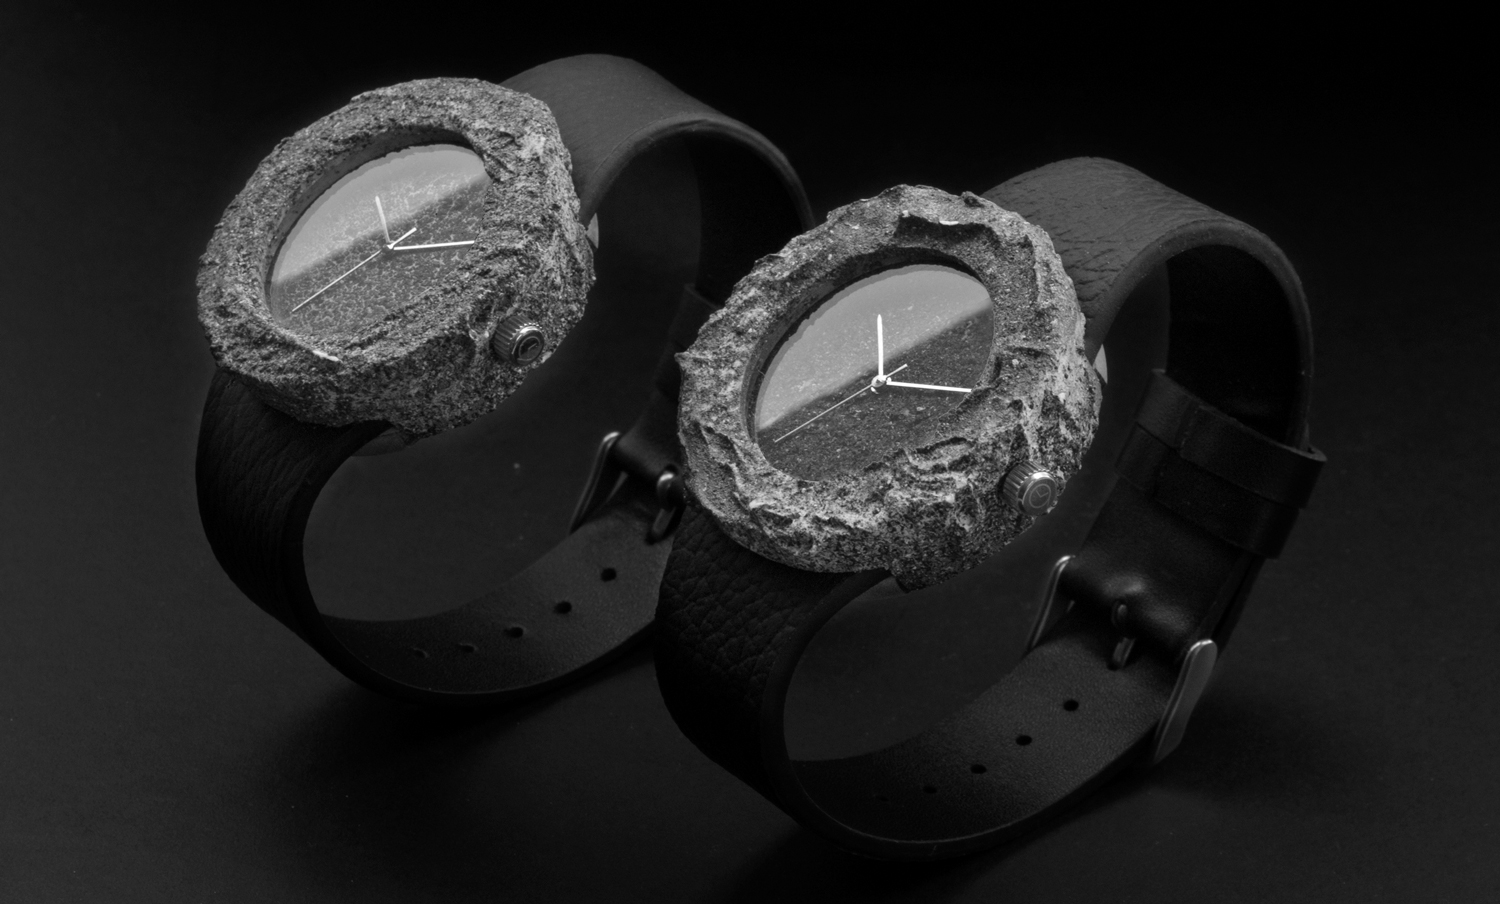 Own A Sizeable Chunk Of The Moon With This Lunar Watch